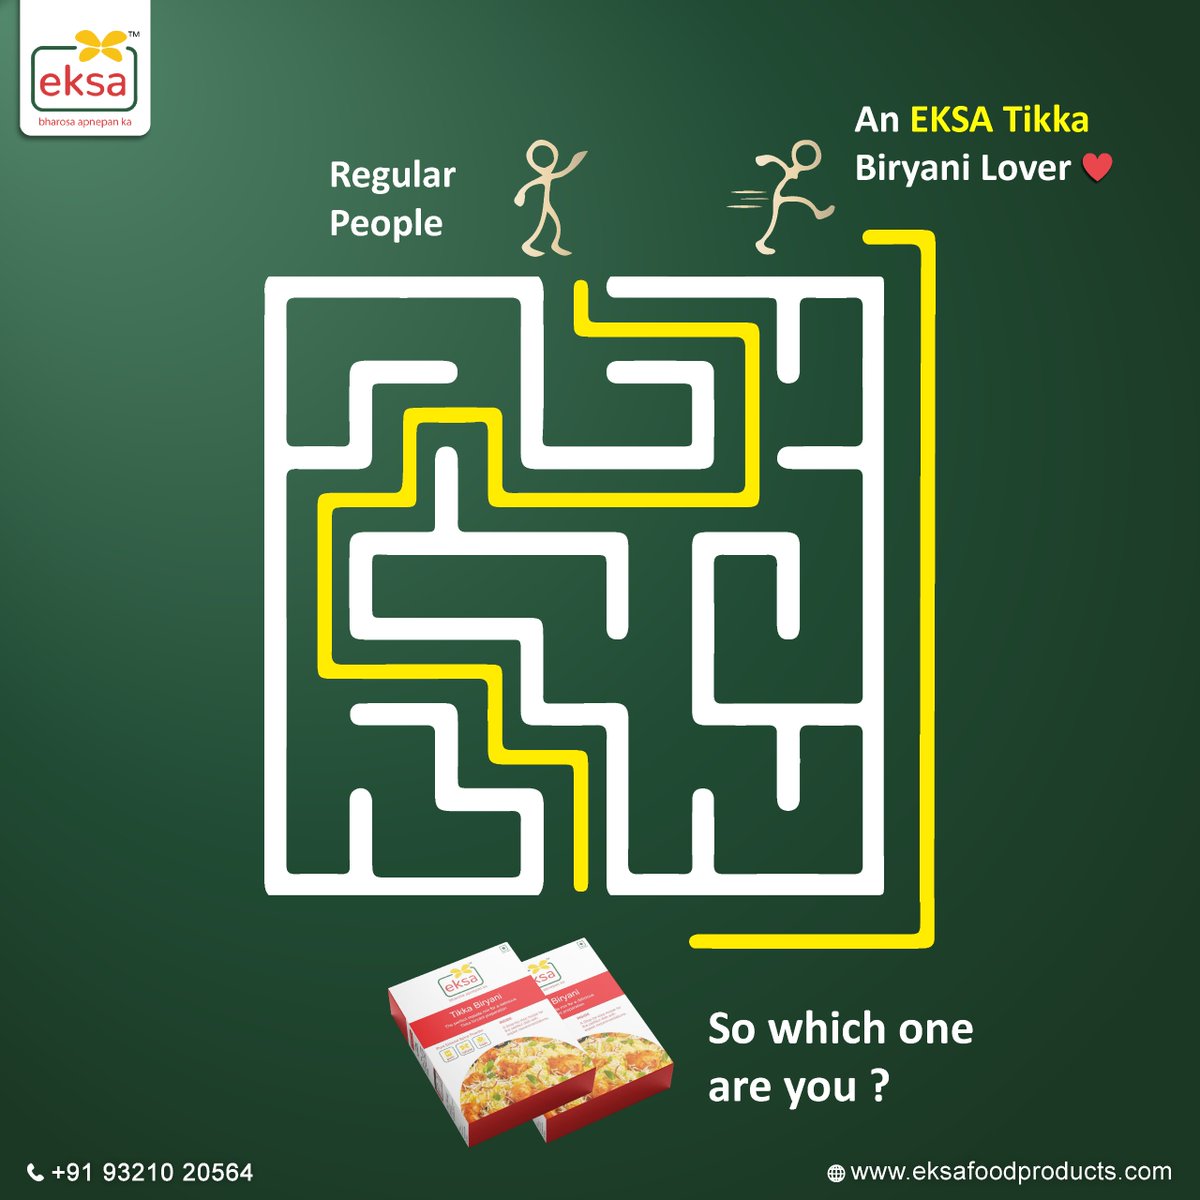 Step up your cooking game with EKSA and taste the difference they bring to your dishes.

#eksa #eksafoodproducts #eksamasala #bharosaapnepanka #spices #masala #spice #food #foodie #foodlover #deliciousfood #deliciouseats #delicioustreats #deliciousdishes #DeliciousDelights